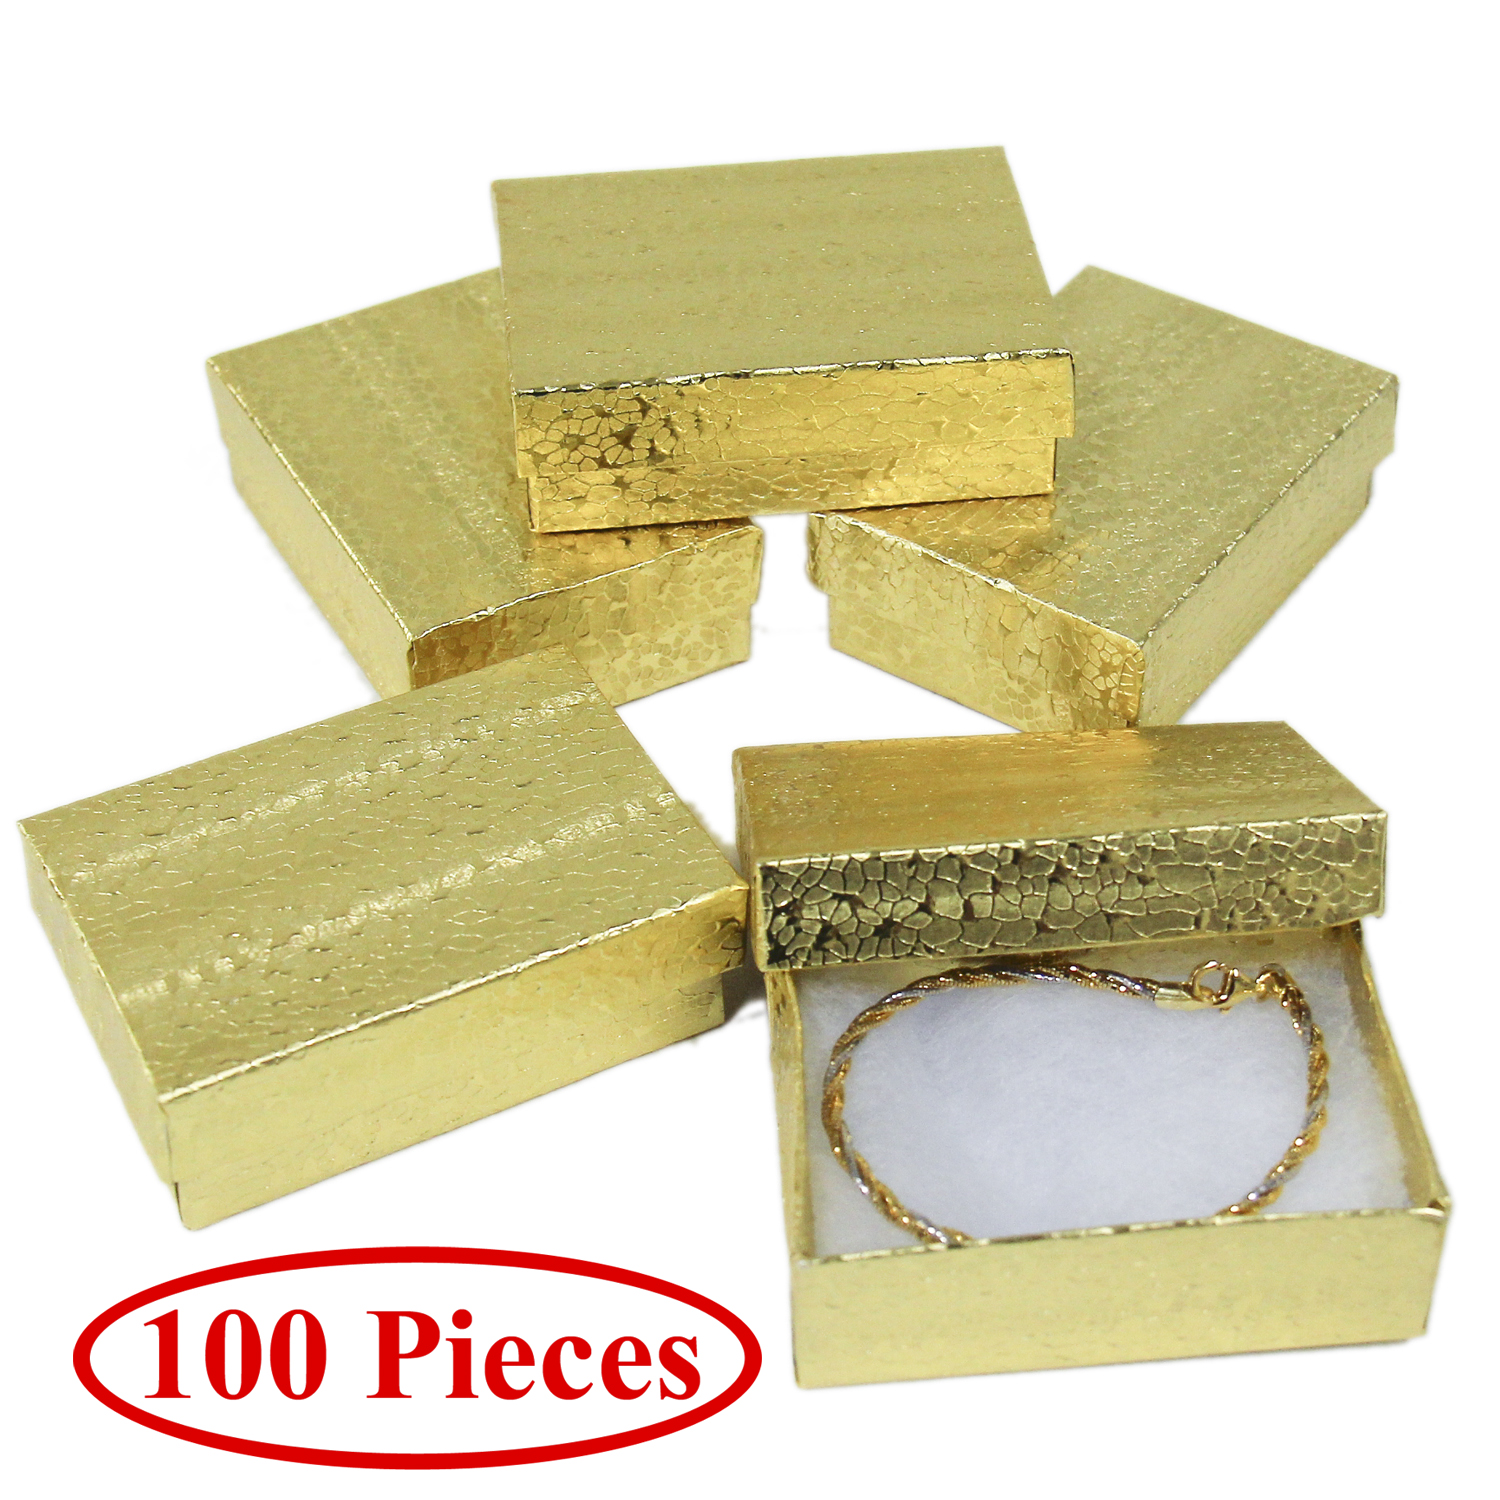 Cotton Filled Jewelry Gift Box  Silver Foil 5 3/8" x 3 7/8" x 1"  Pkg Of  12 